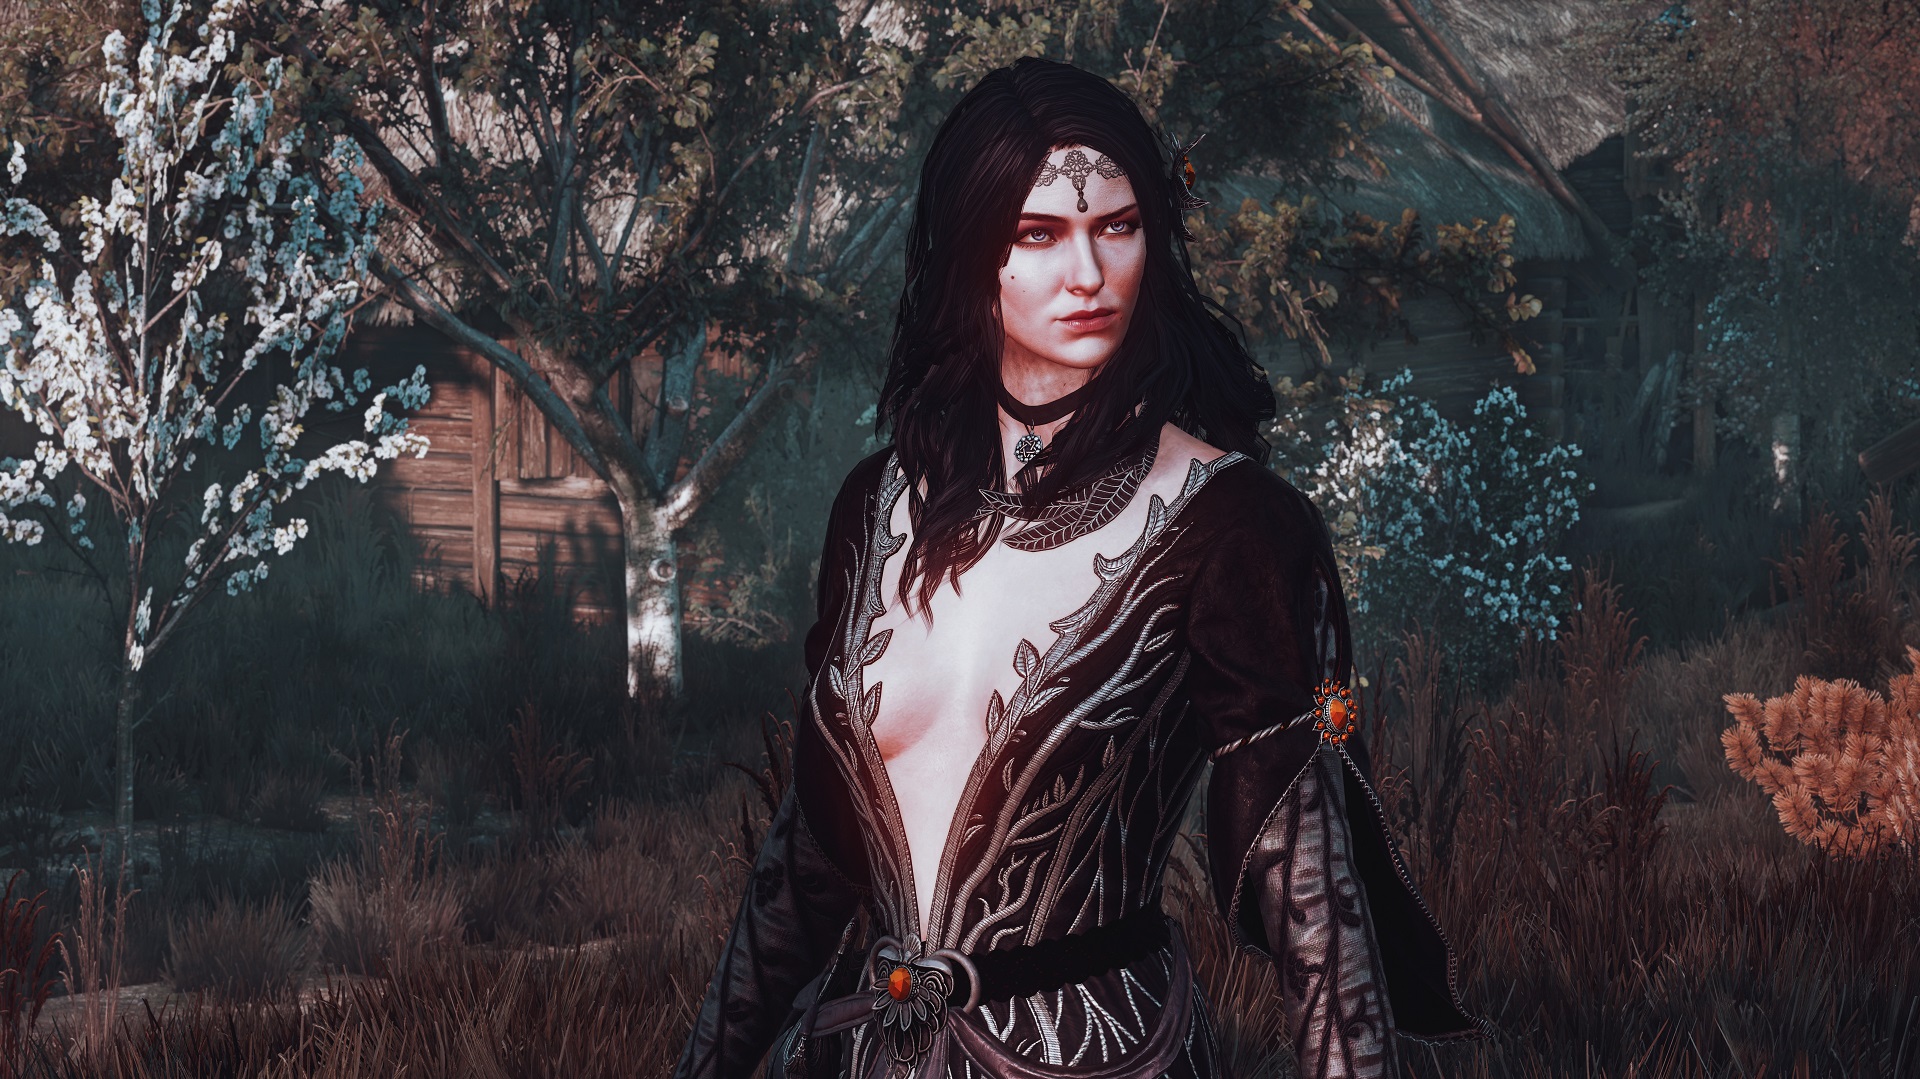 The witcher 3 alternative look for yennefer фото 33